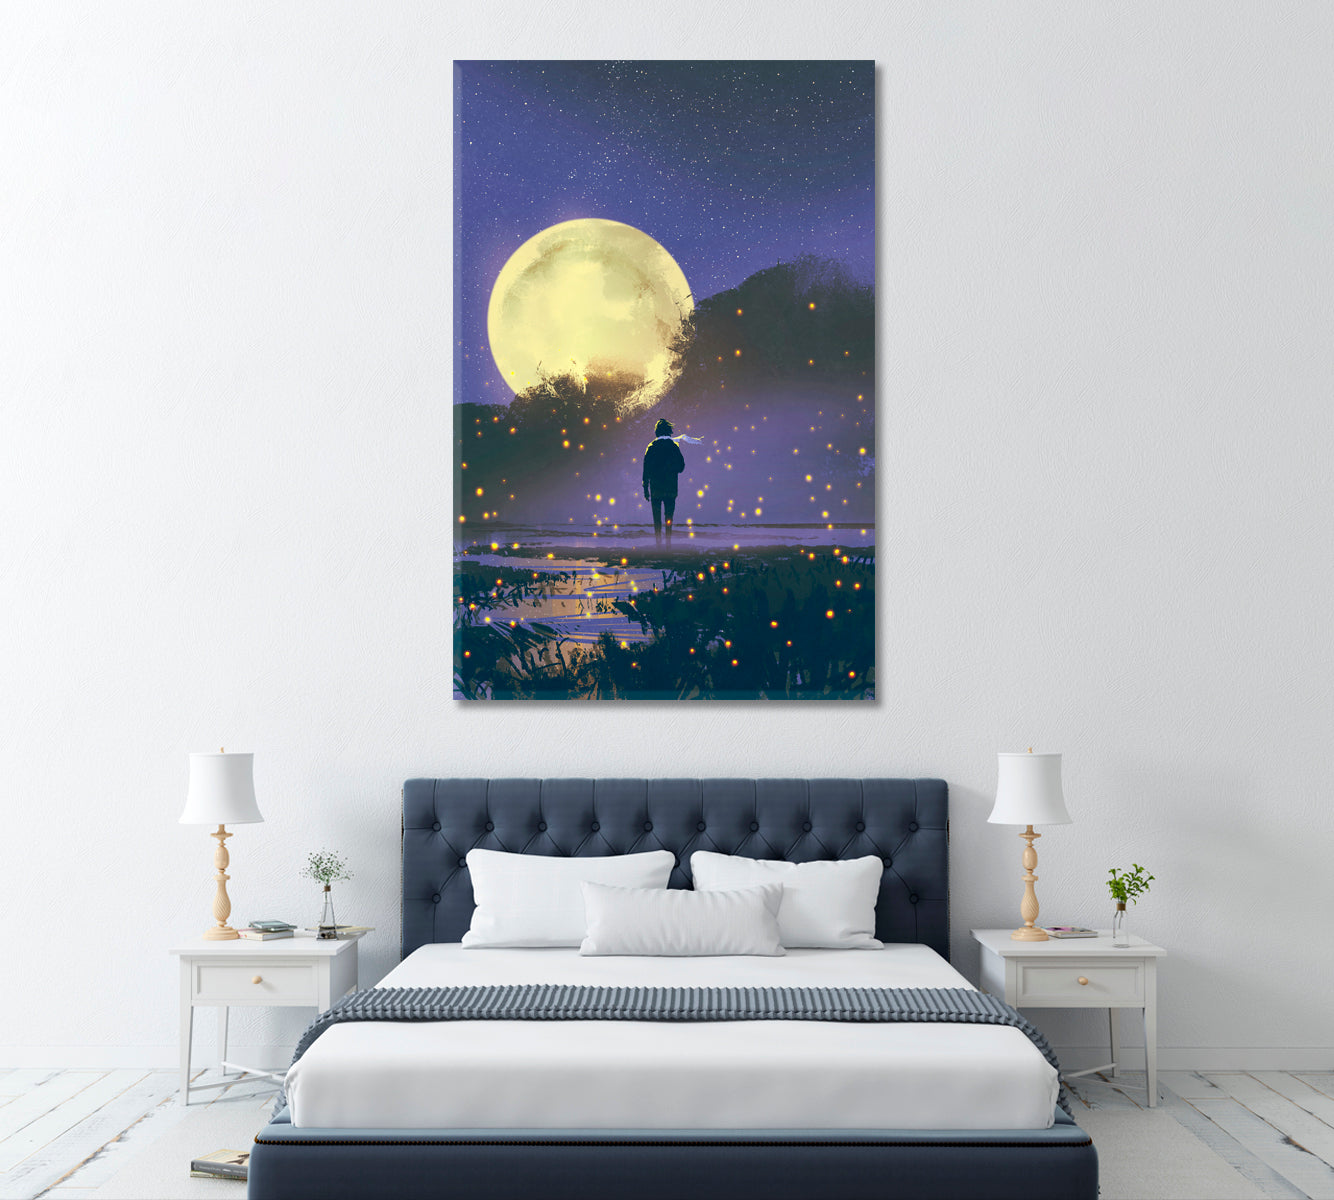 Man Standing in Swamp with Fireflies and Full Moon Canvas Print ArtLexy 1 Panel 16"x24" inches 